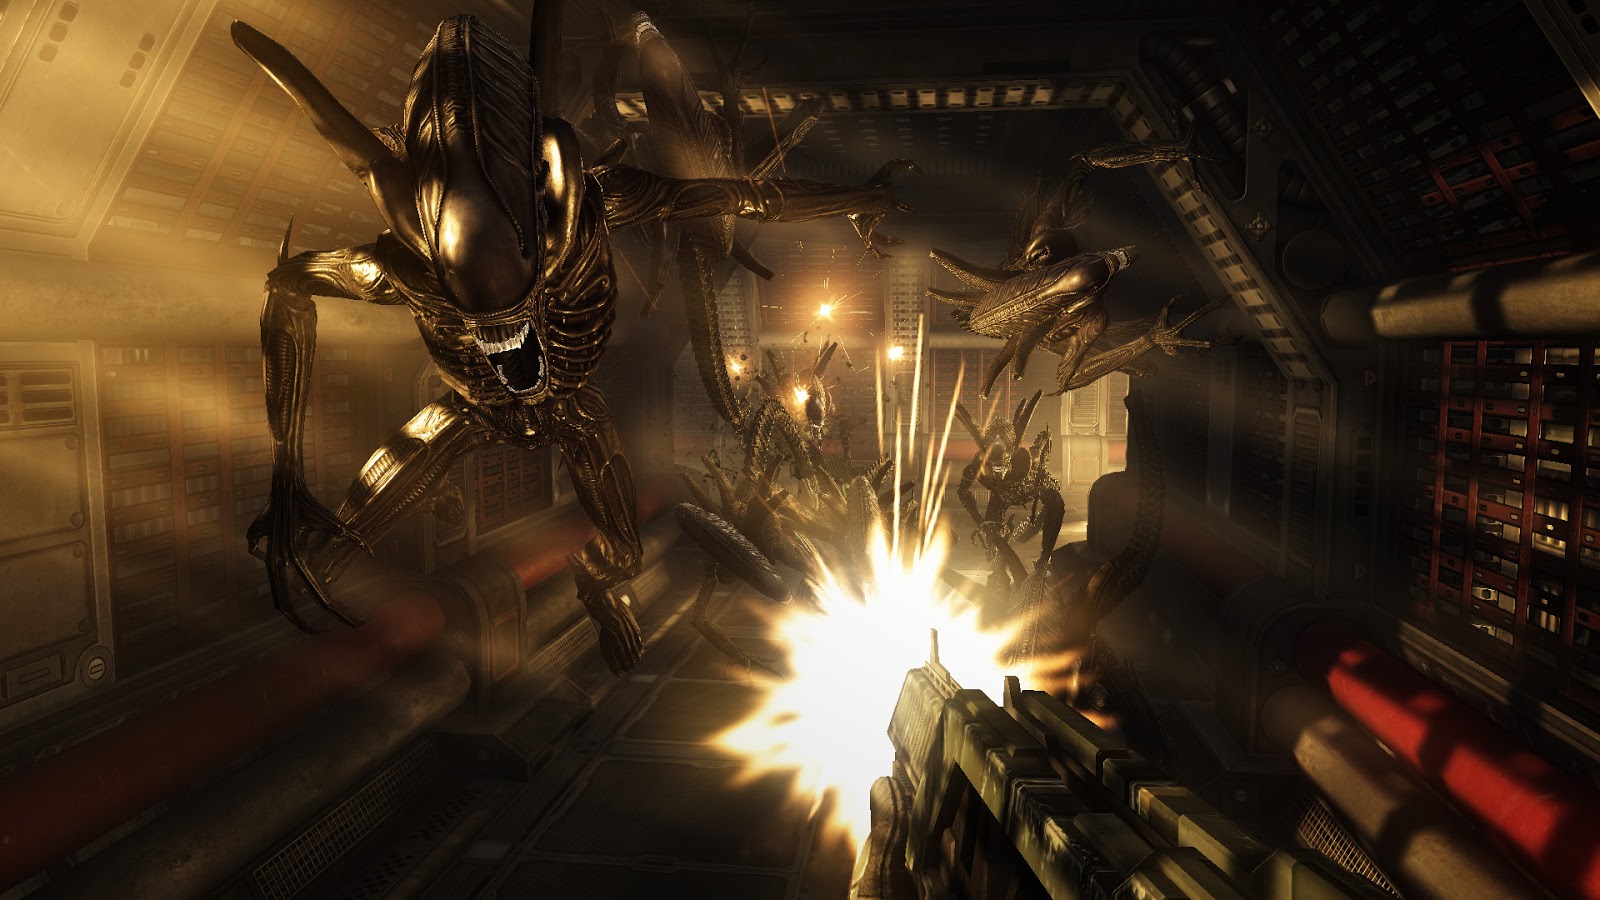 Who els wishes the 2010 alien vs predator game made by rebellion could be  remastered? : r/predator